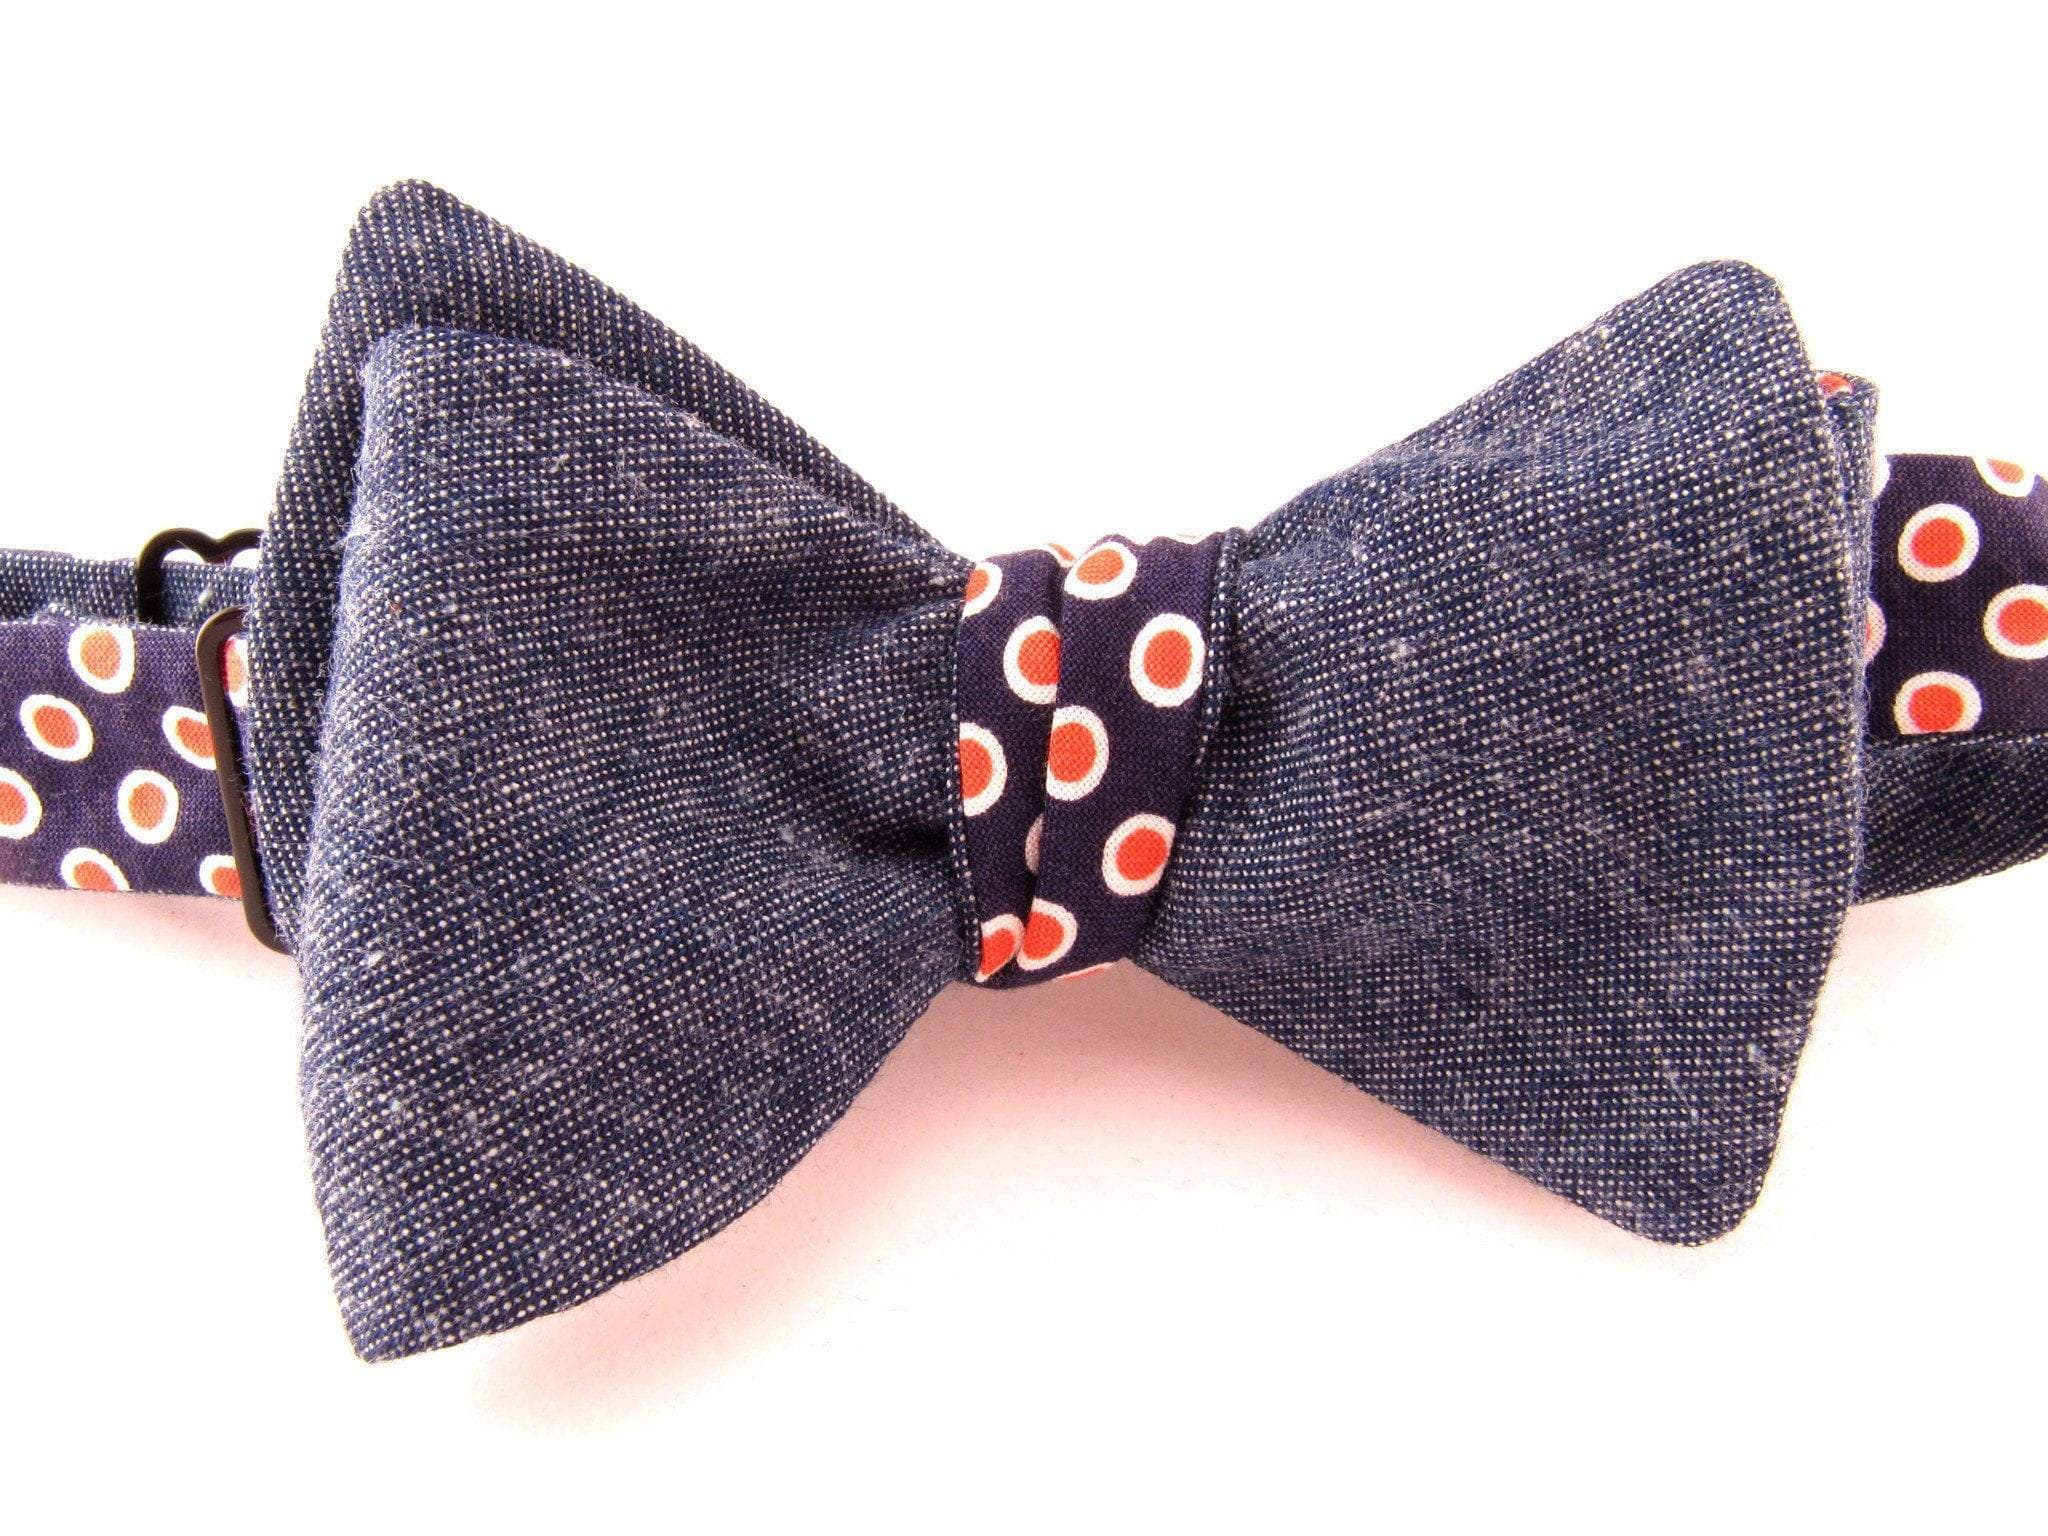 Ella Bing Freestyle The Roman Haskell Reversible Chambray Cloth Bow Tie